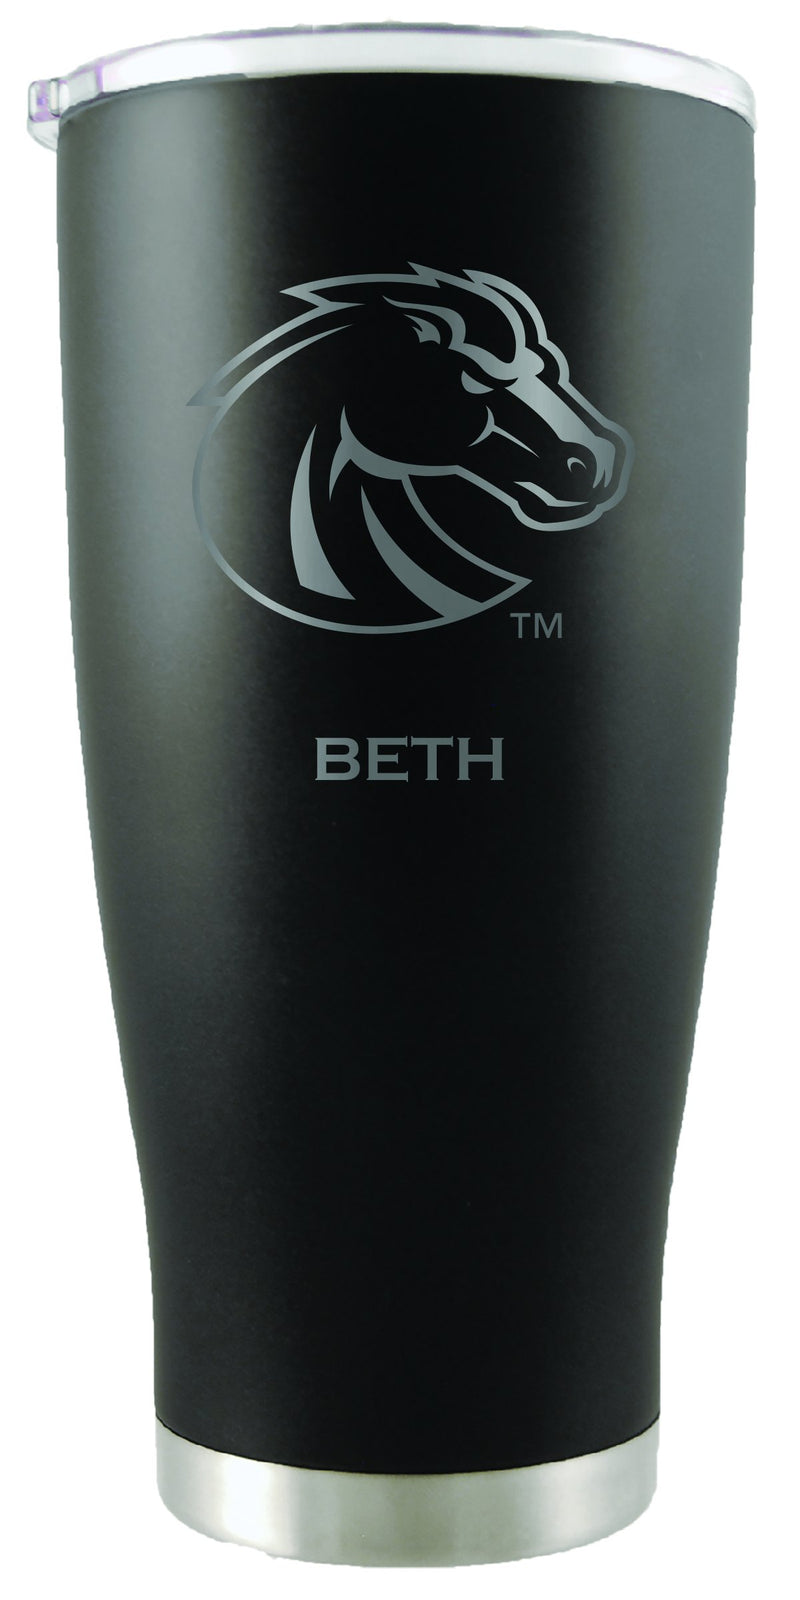 20oz Black Personalized Stainless Steel Tumbler | Boise State
Boise State Broncos, BOS, COL, CurrentProduct, Drinkware_category_All, Personalized_Personalized
The Memory Company